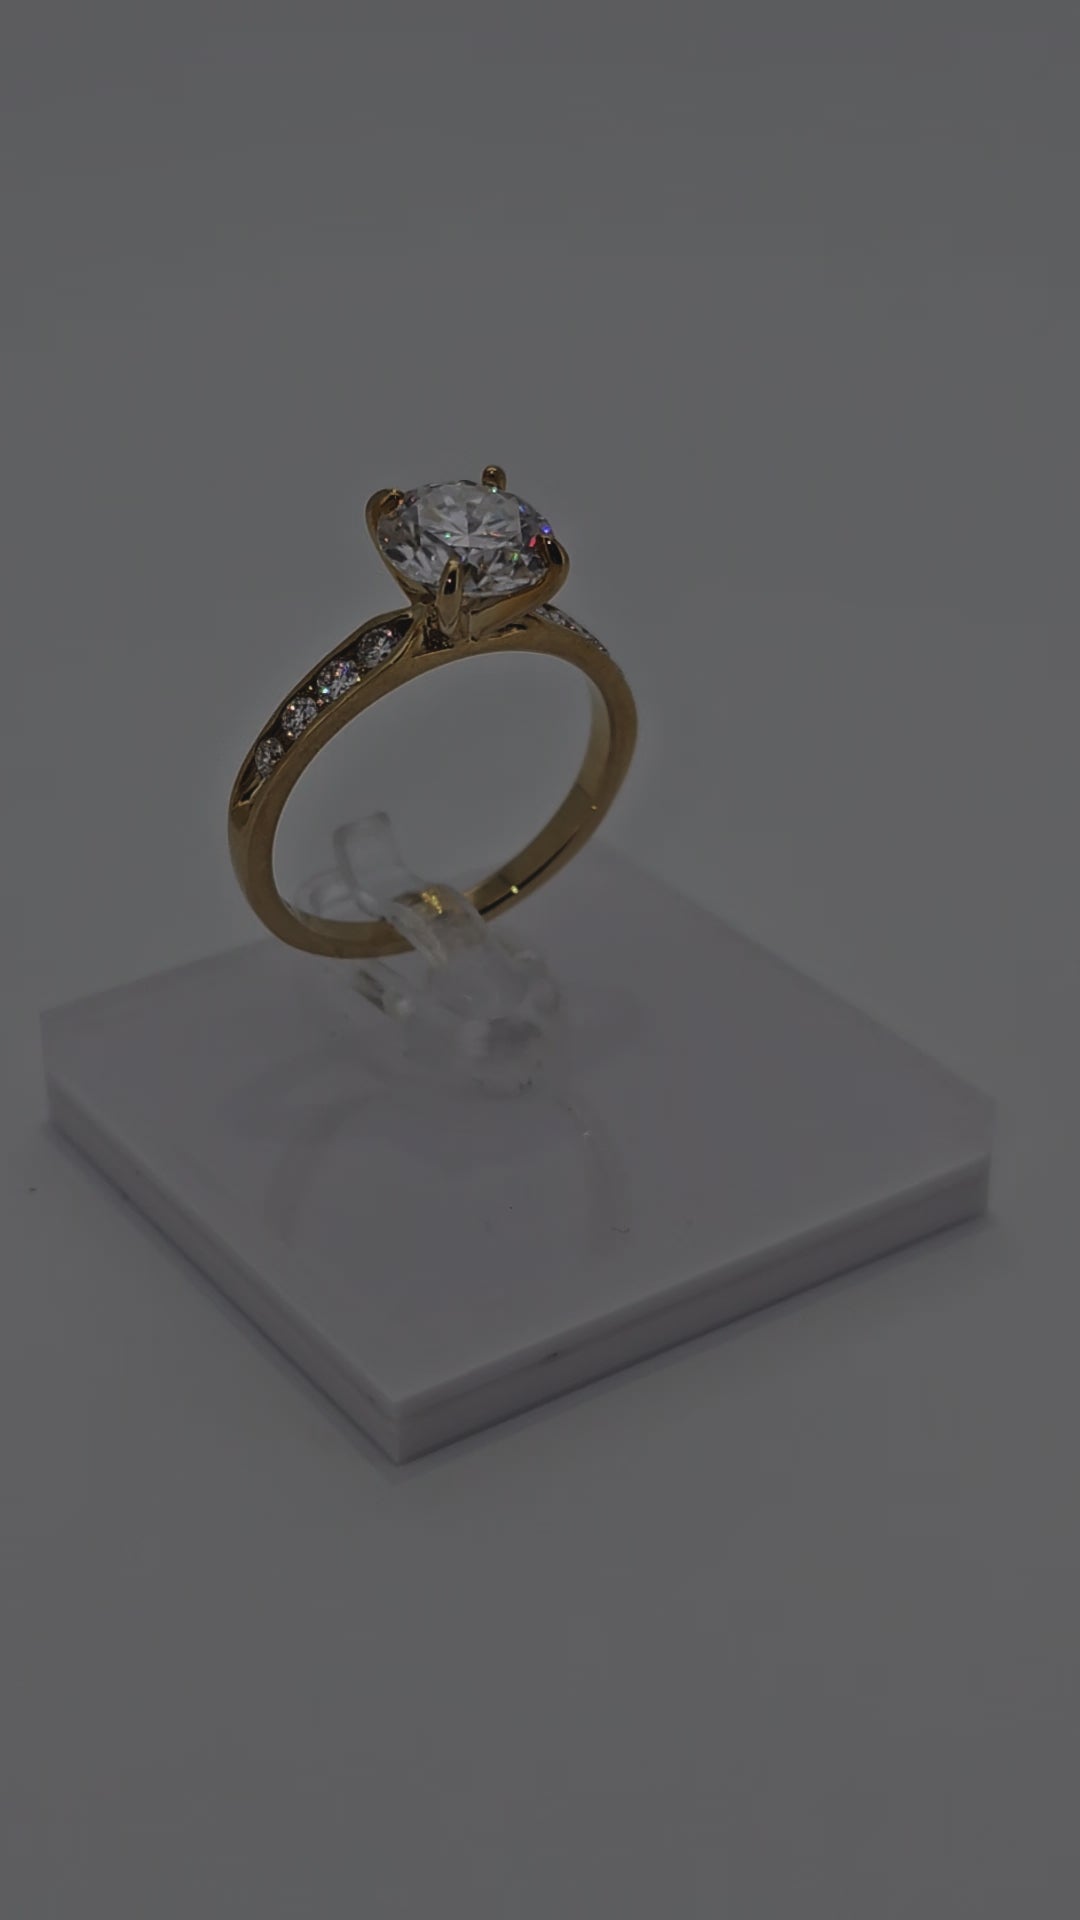 Video of Luxury Beautiful 10 Karat Solid Gold Brilliant Cut Diamond Solitaire with Bezel Set Diamond Band from Boujee Ice